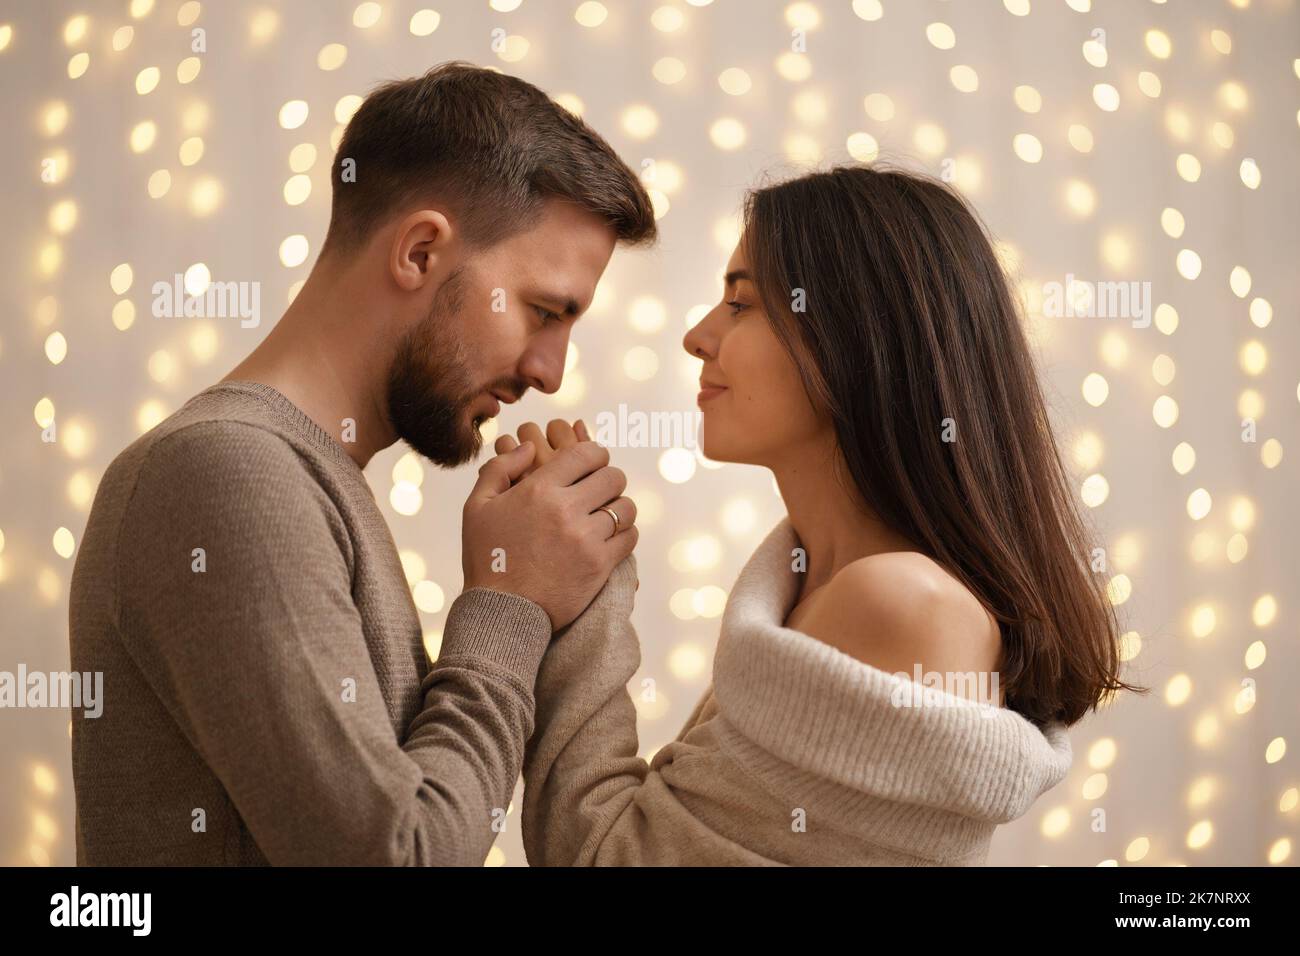 Two cheerful lovely sweet tender beautiful adorable cute romantic married spouses husband and wife looking to each other with lights in background Stock Photo